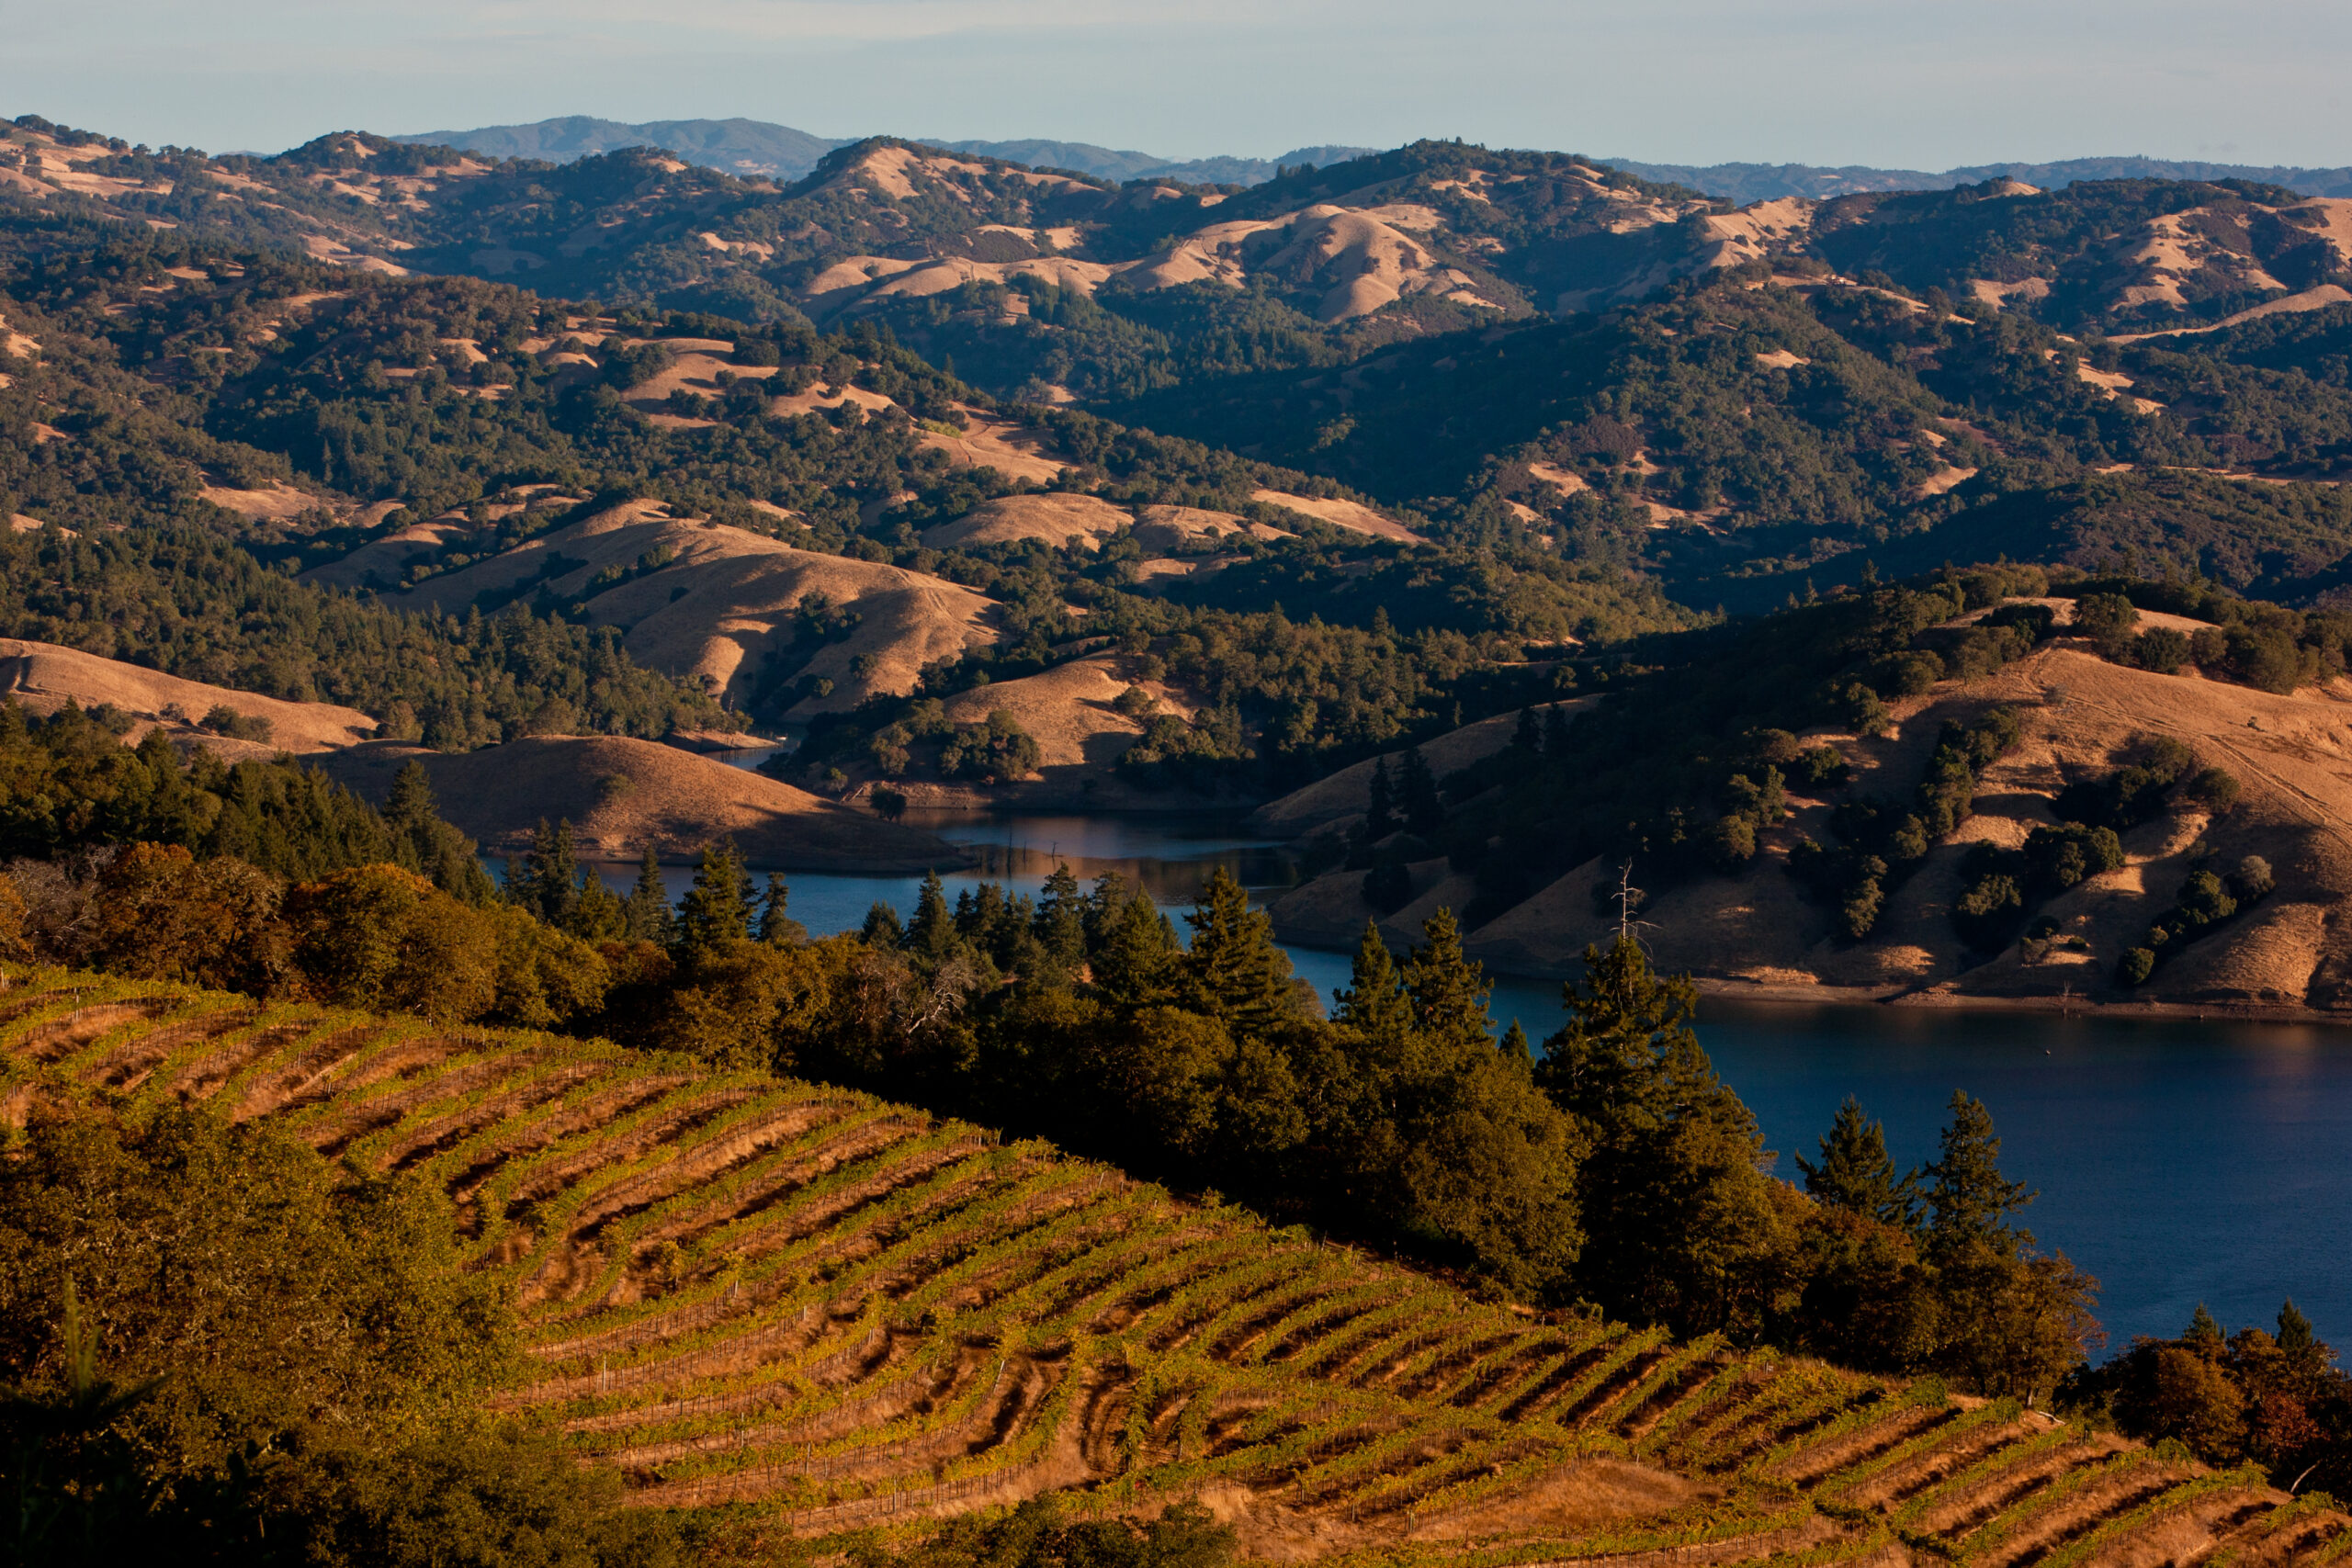 The Wine Lovers Guide to Sonoma Wine Country